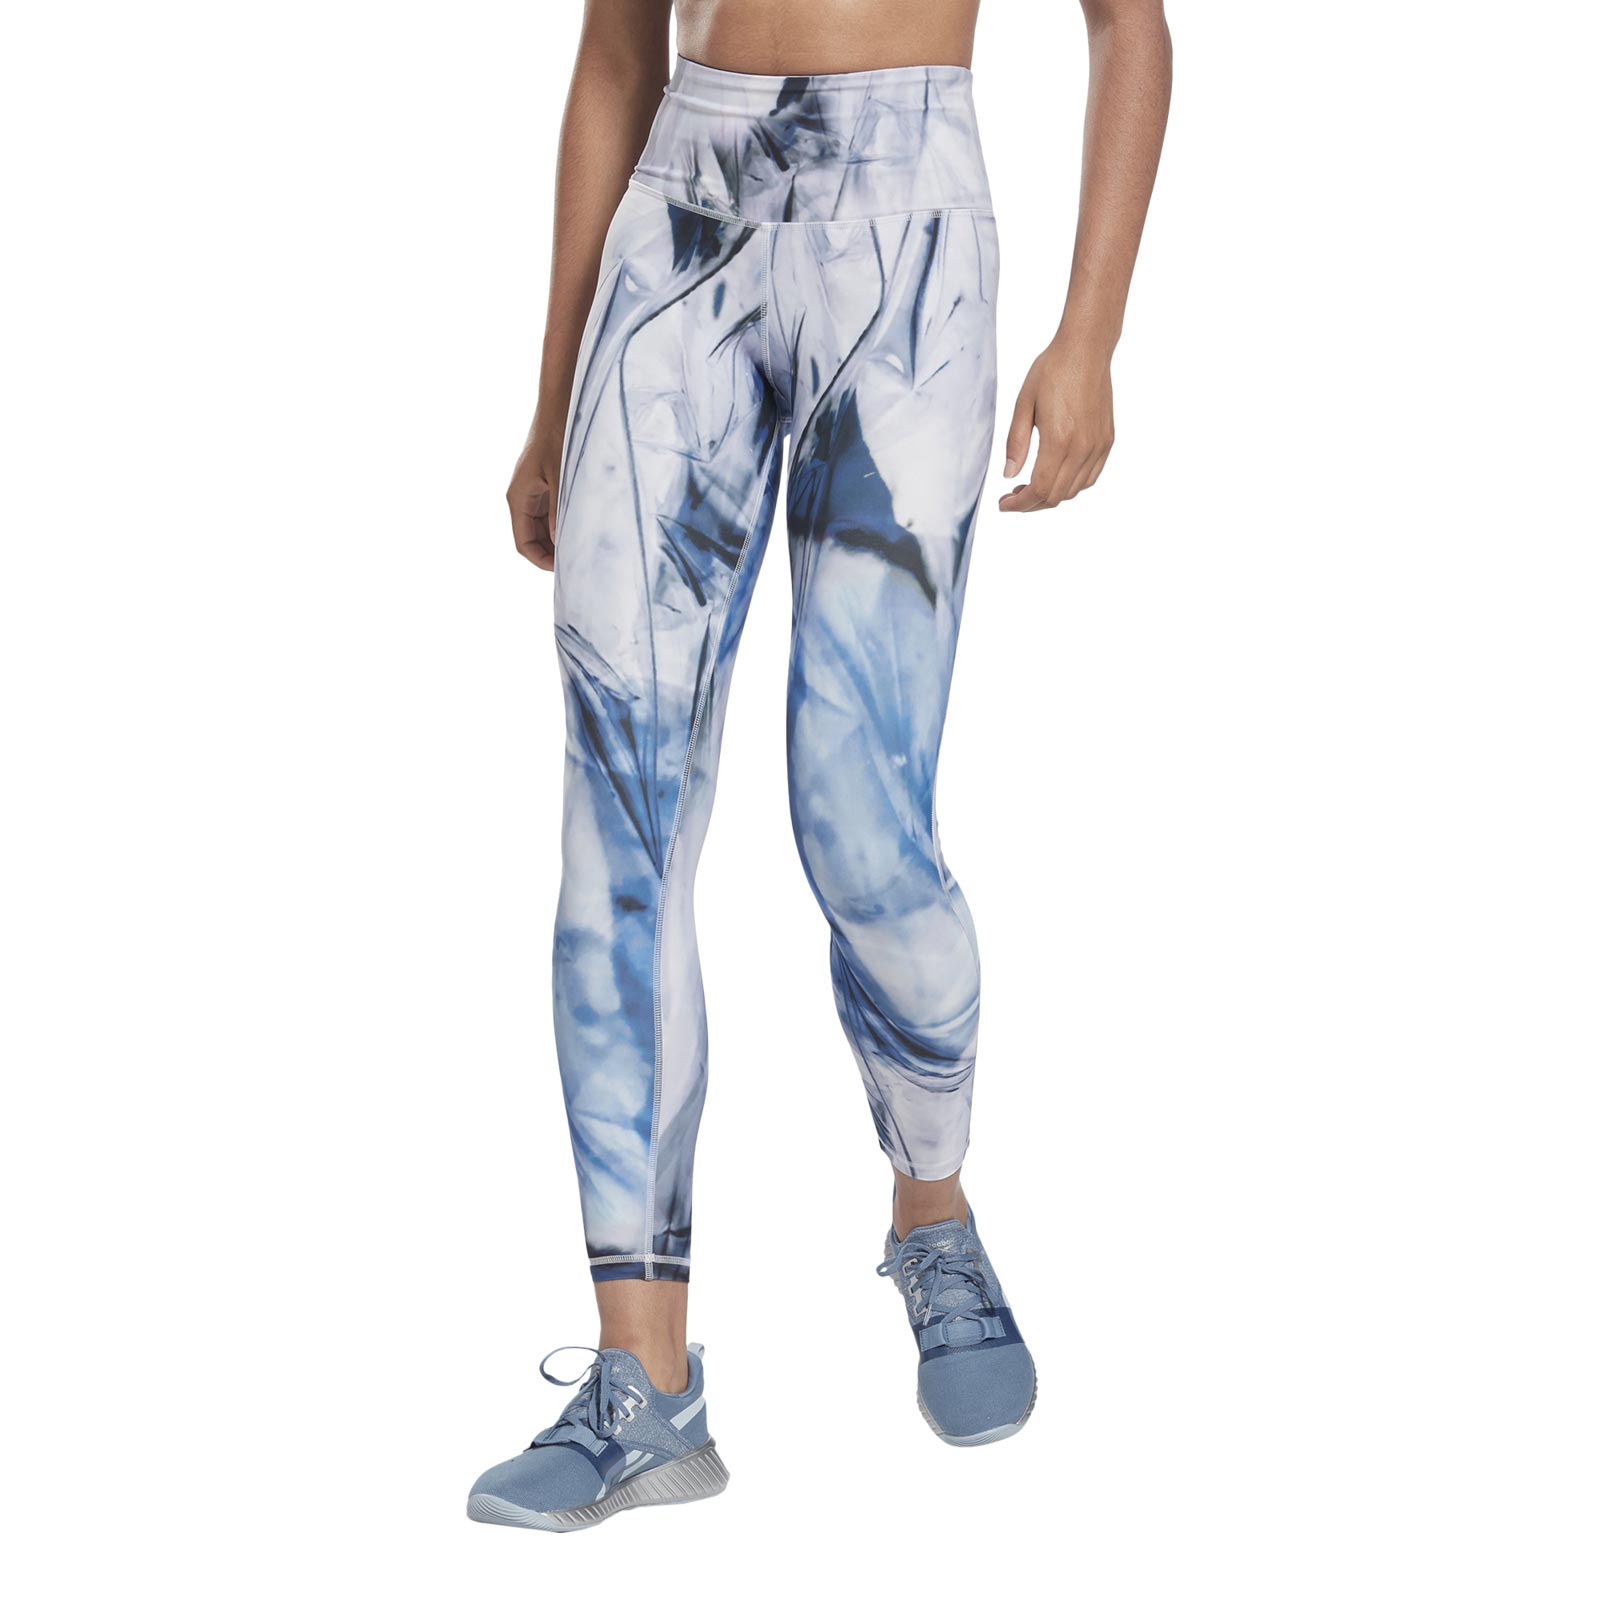 REEBOK LUX BOLD HIGH-WAISTED LIQUID ABYSS PRINT TIGHTS